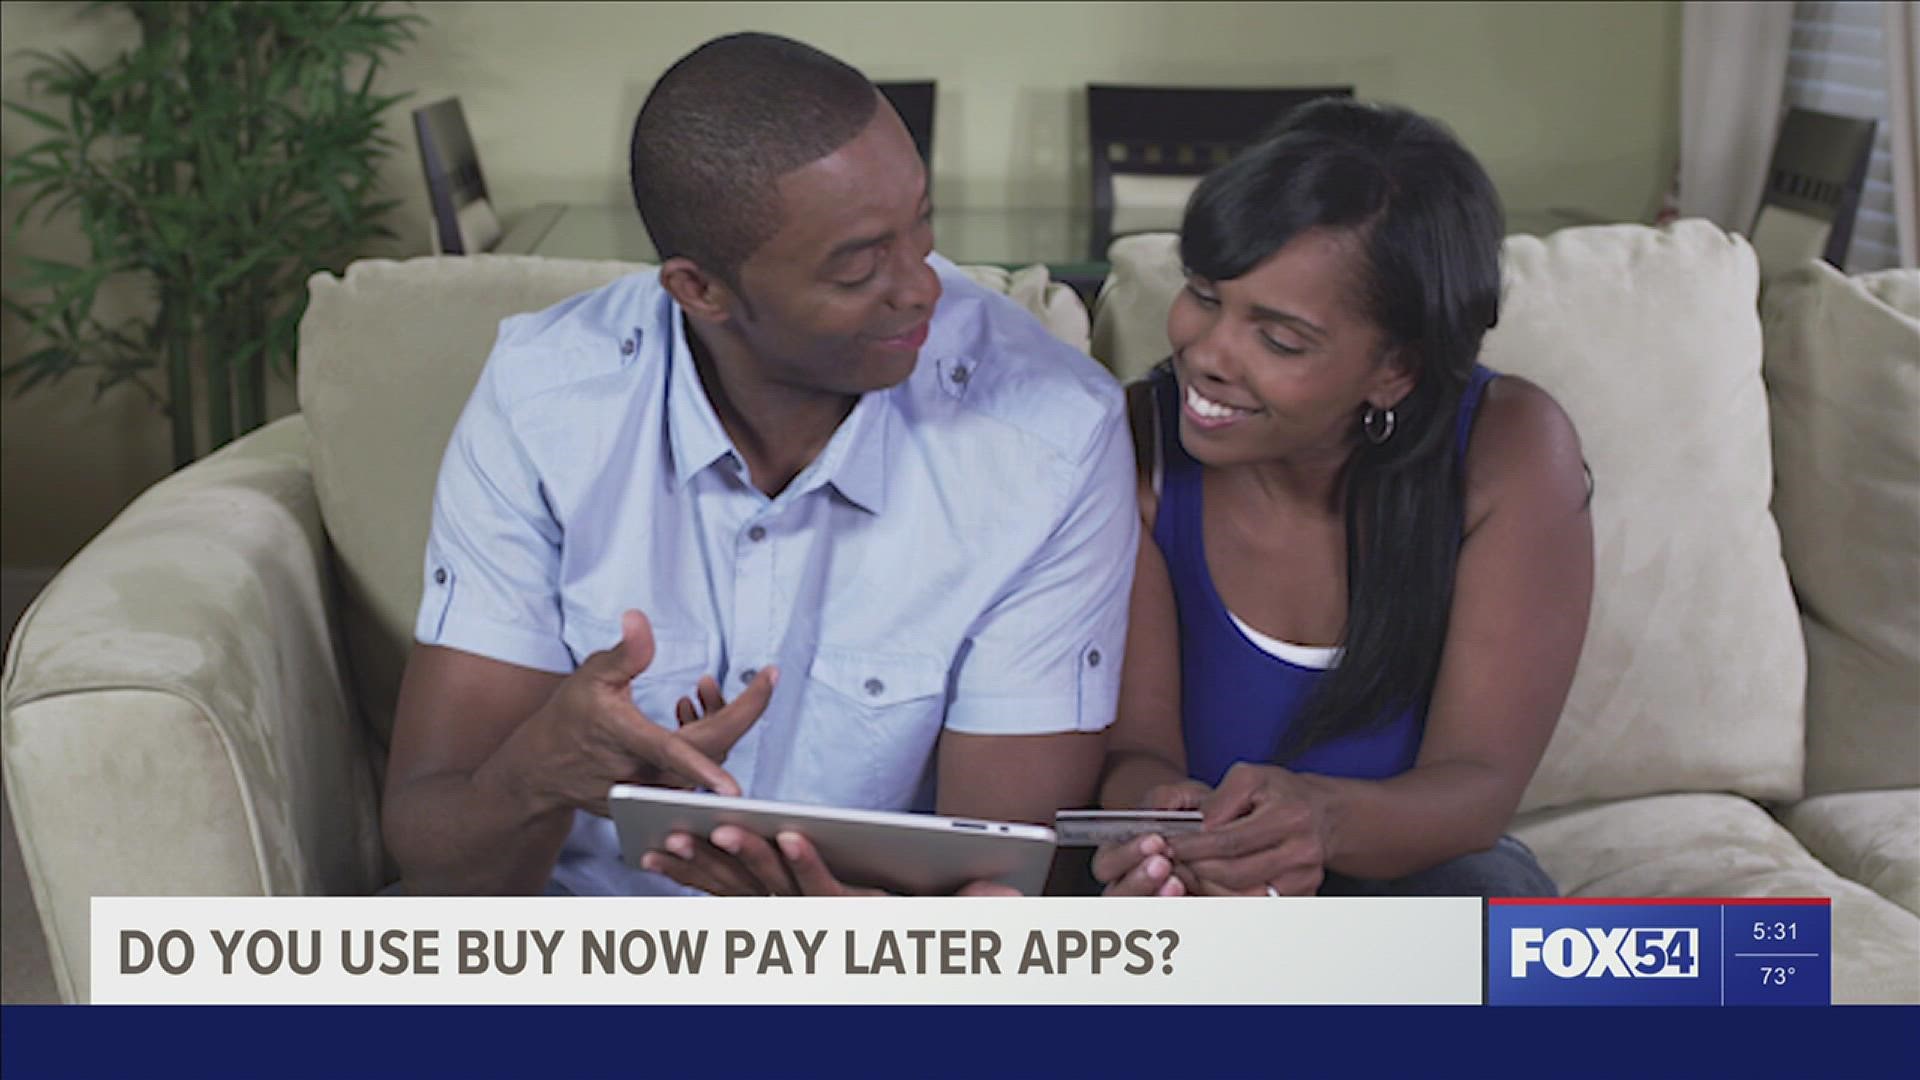 Paying for the purchase using a buy now, pay later app has become increasingly popular, but could seriously impact your credit.